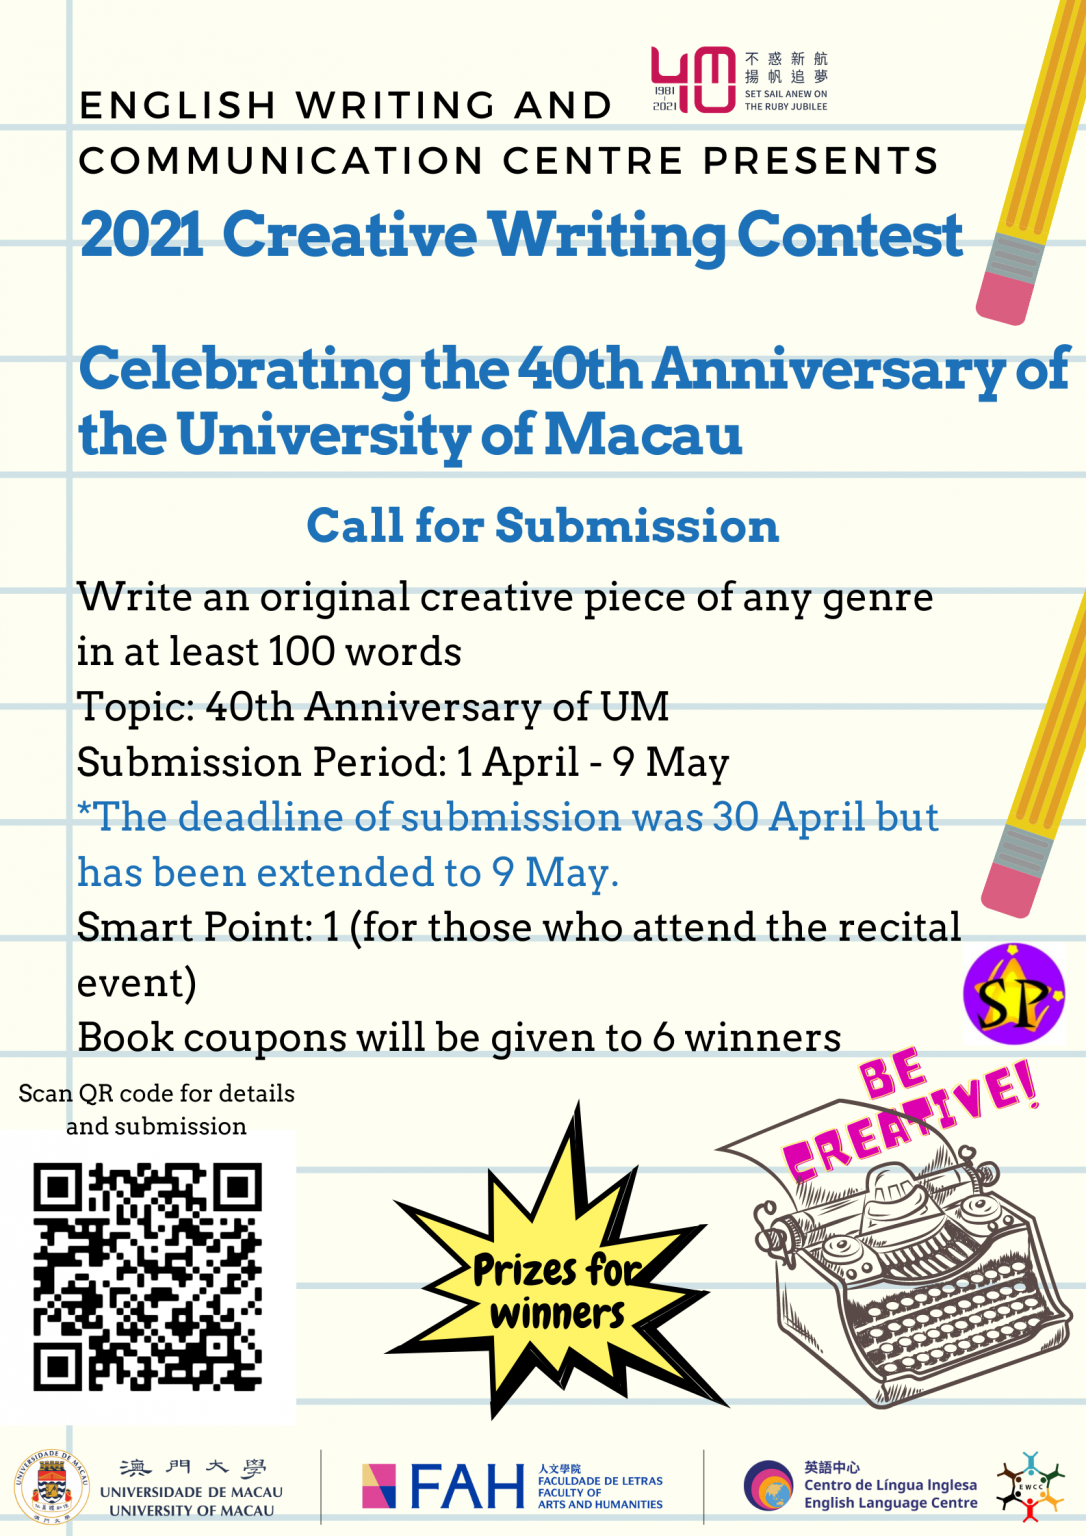 creative writing competition ideas for students